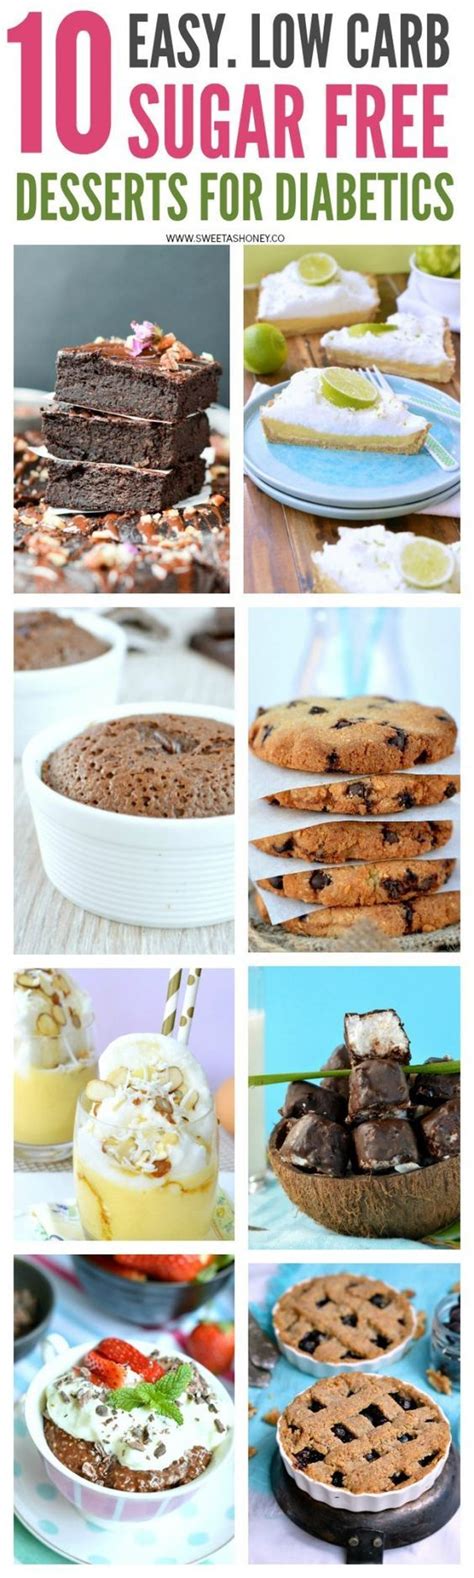 10 sugar free desserts for diabetics sweetashoney. Yes you can have diabetes and eat desserts ! Indulge with ...